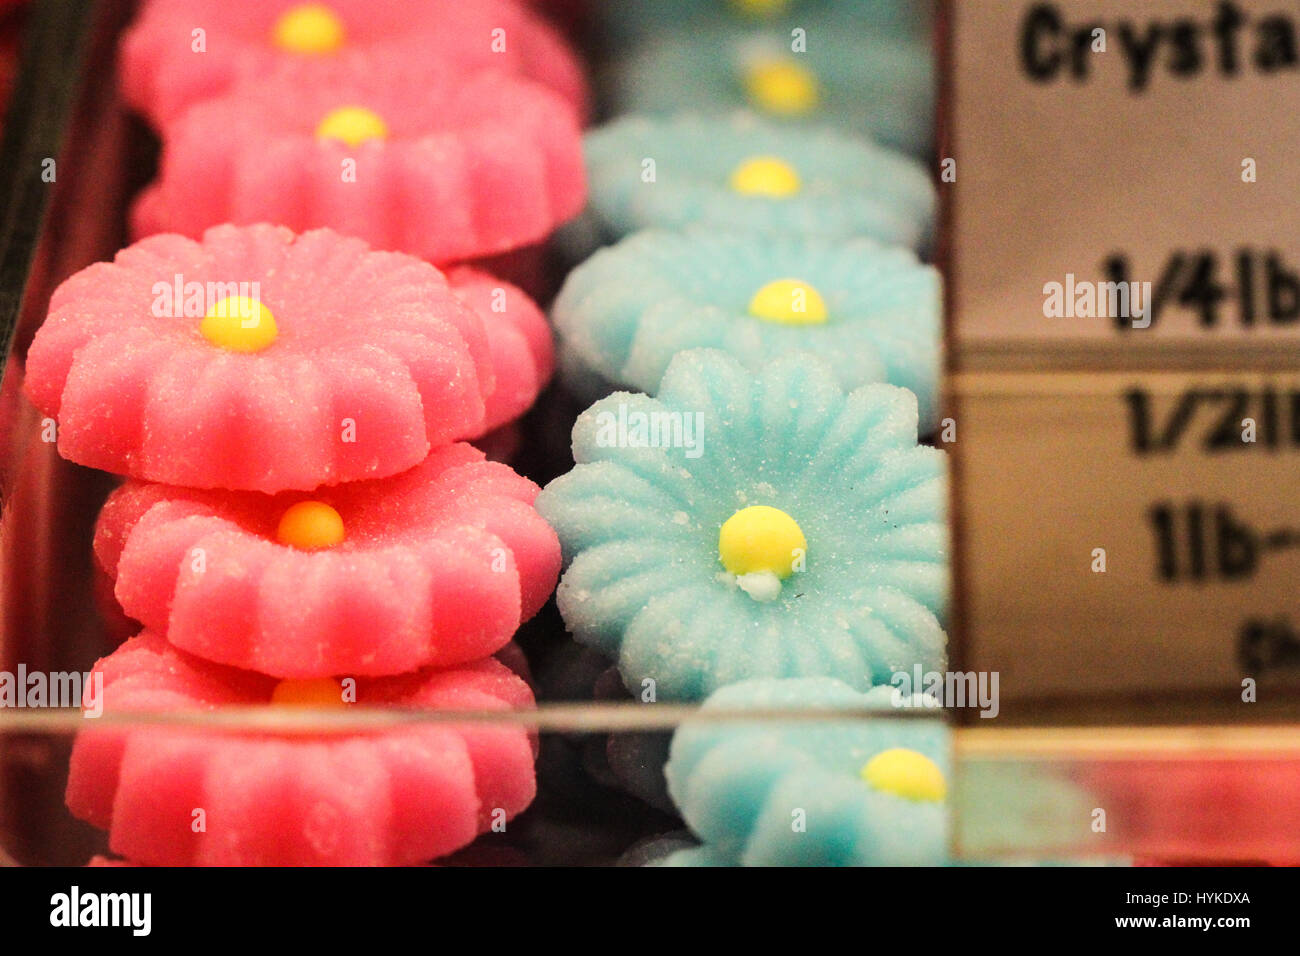 delightful pale pink and blue flower-shaped candies with yellow centers on display at a candy shop in the United States Stock Photo